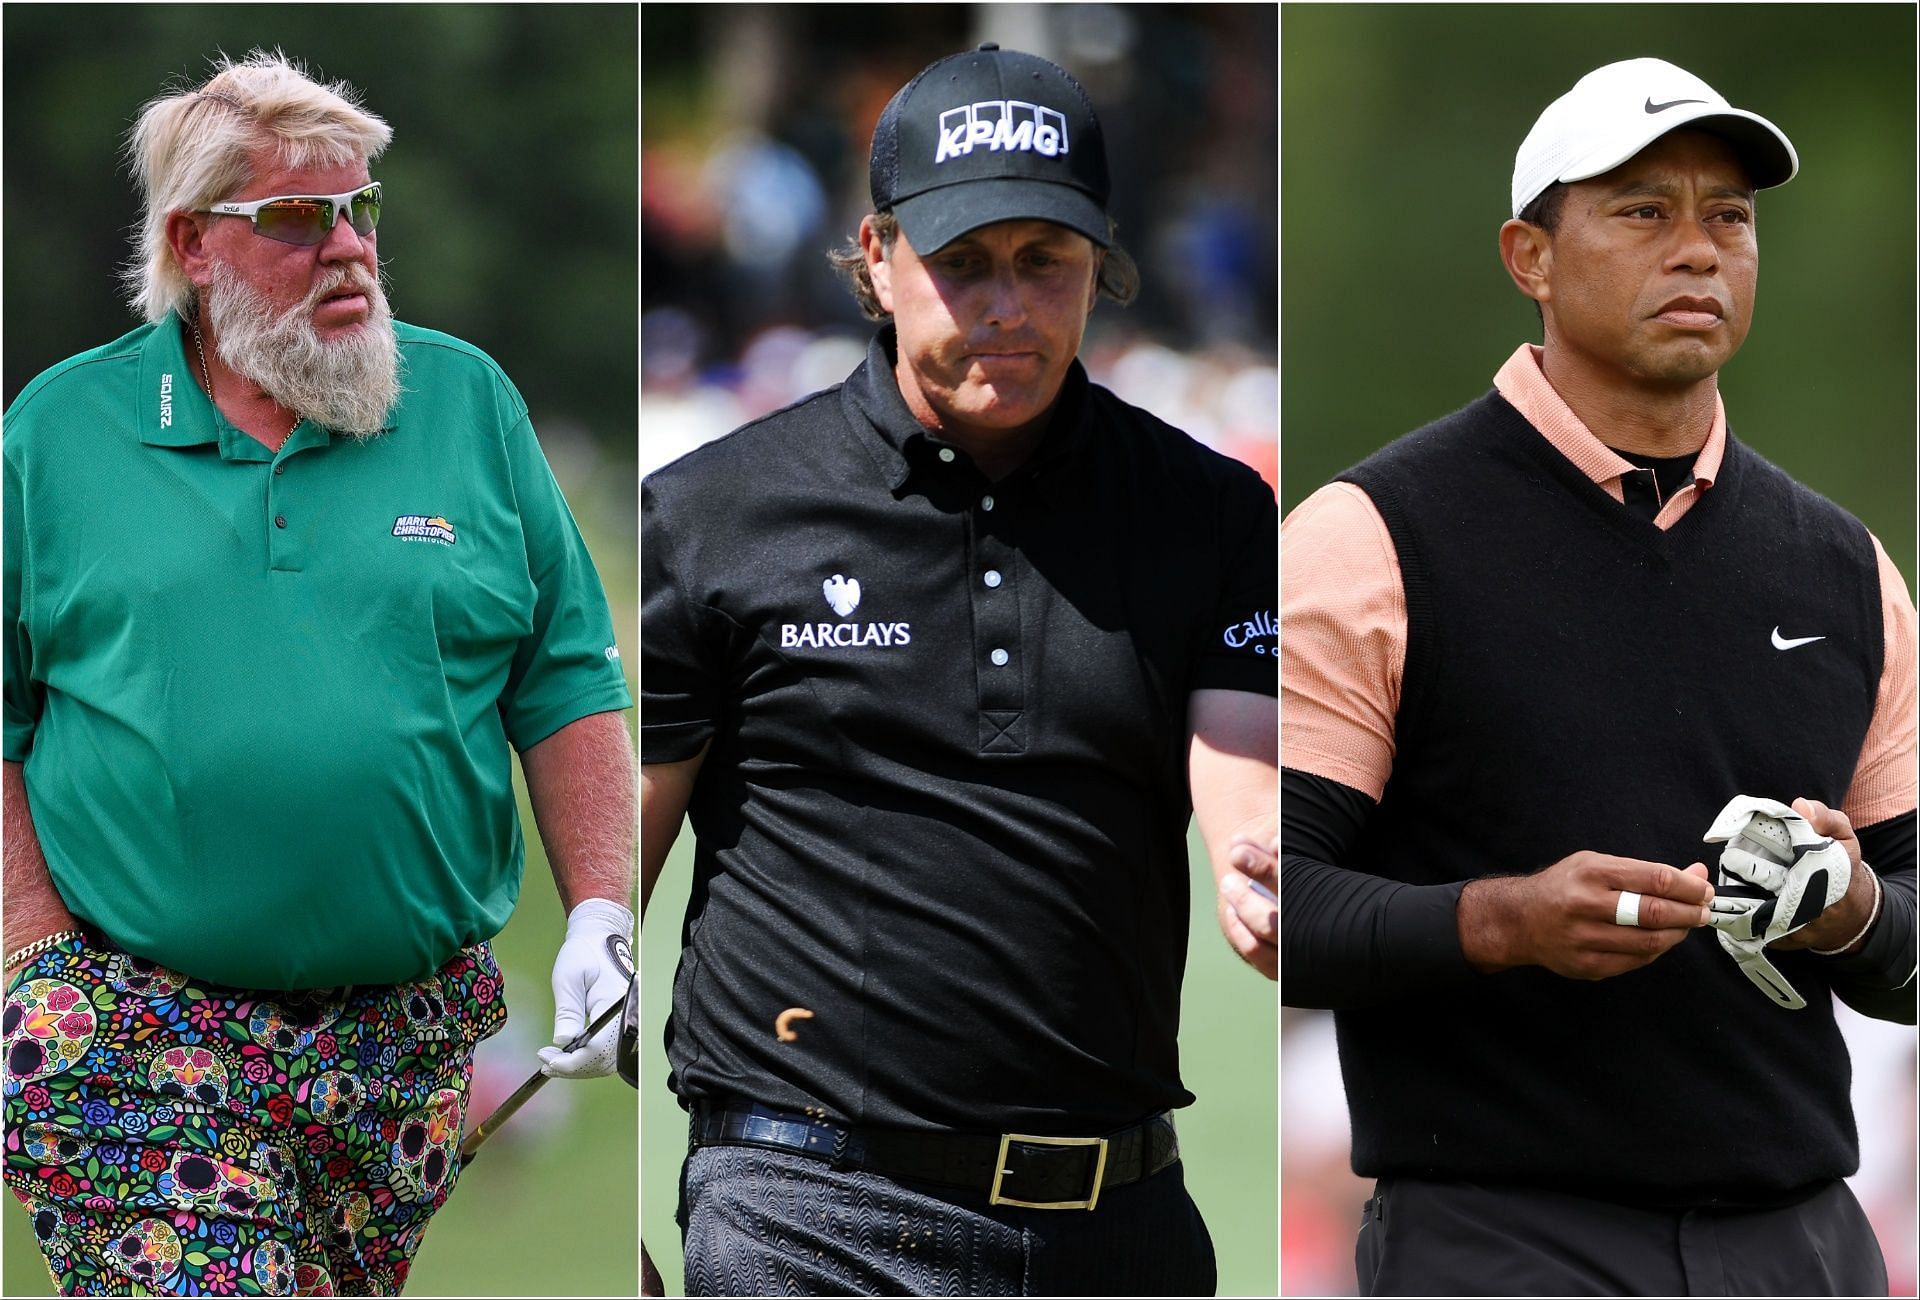 John Daly, Phil Mickelson, and Tiger Woods (via Getty Images)